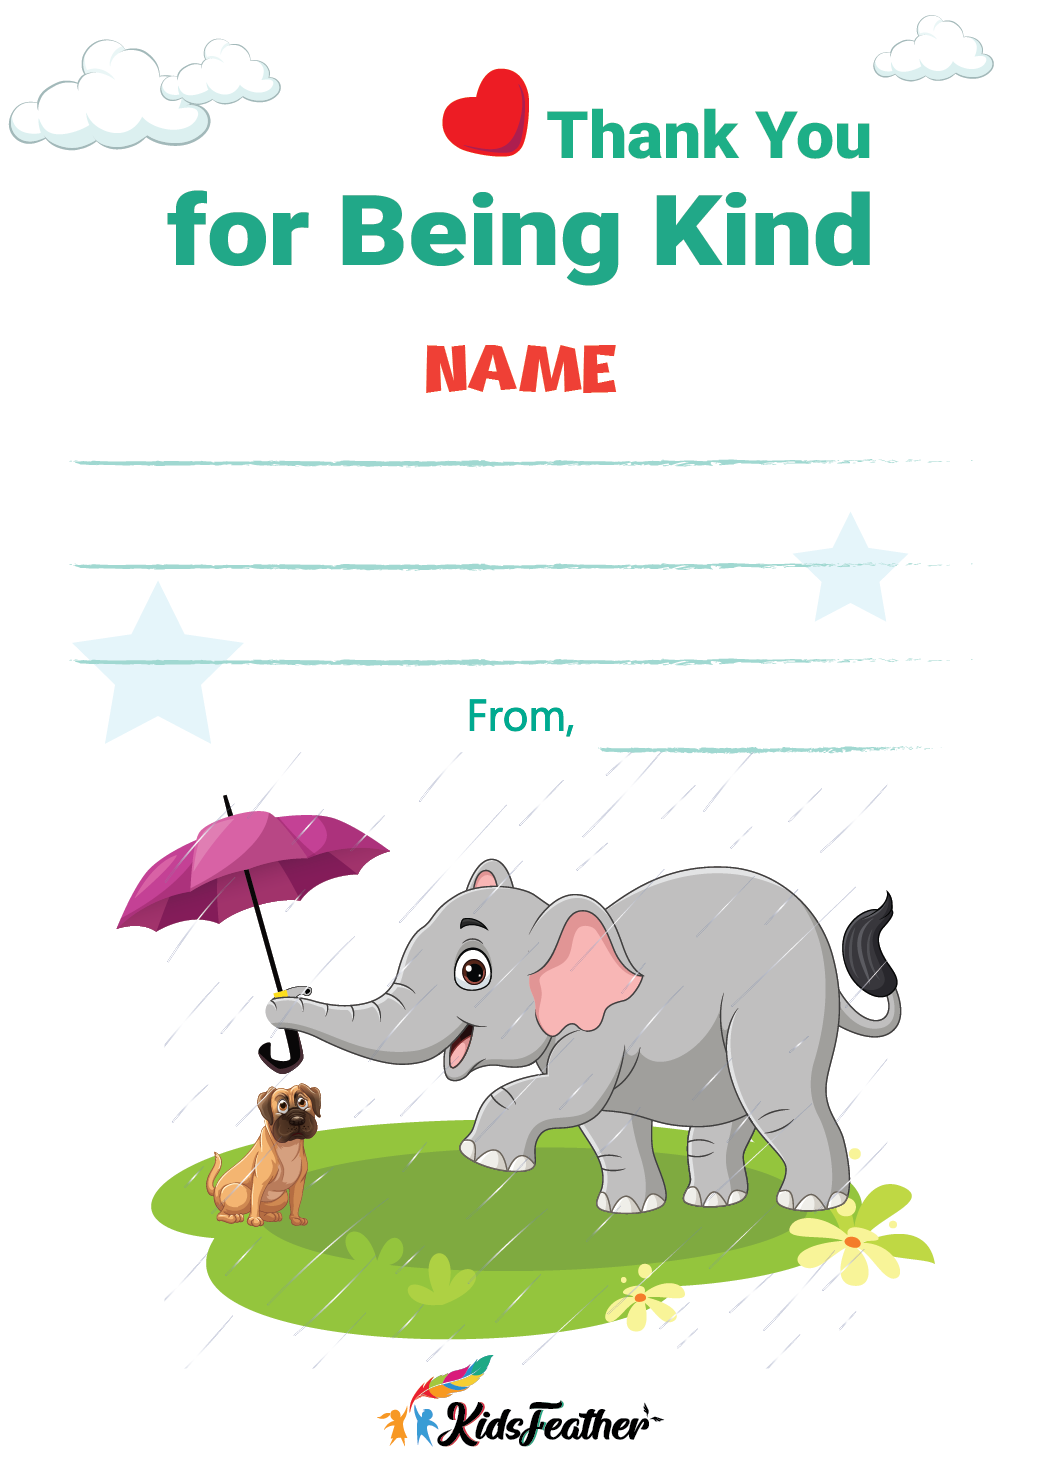 For Being Kind